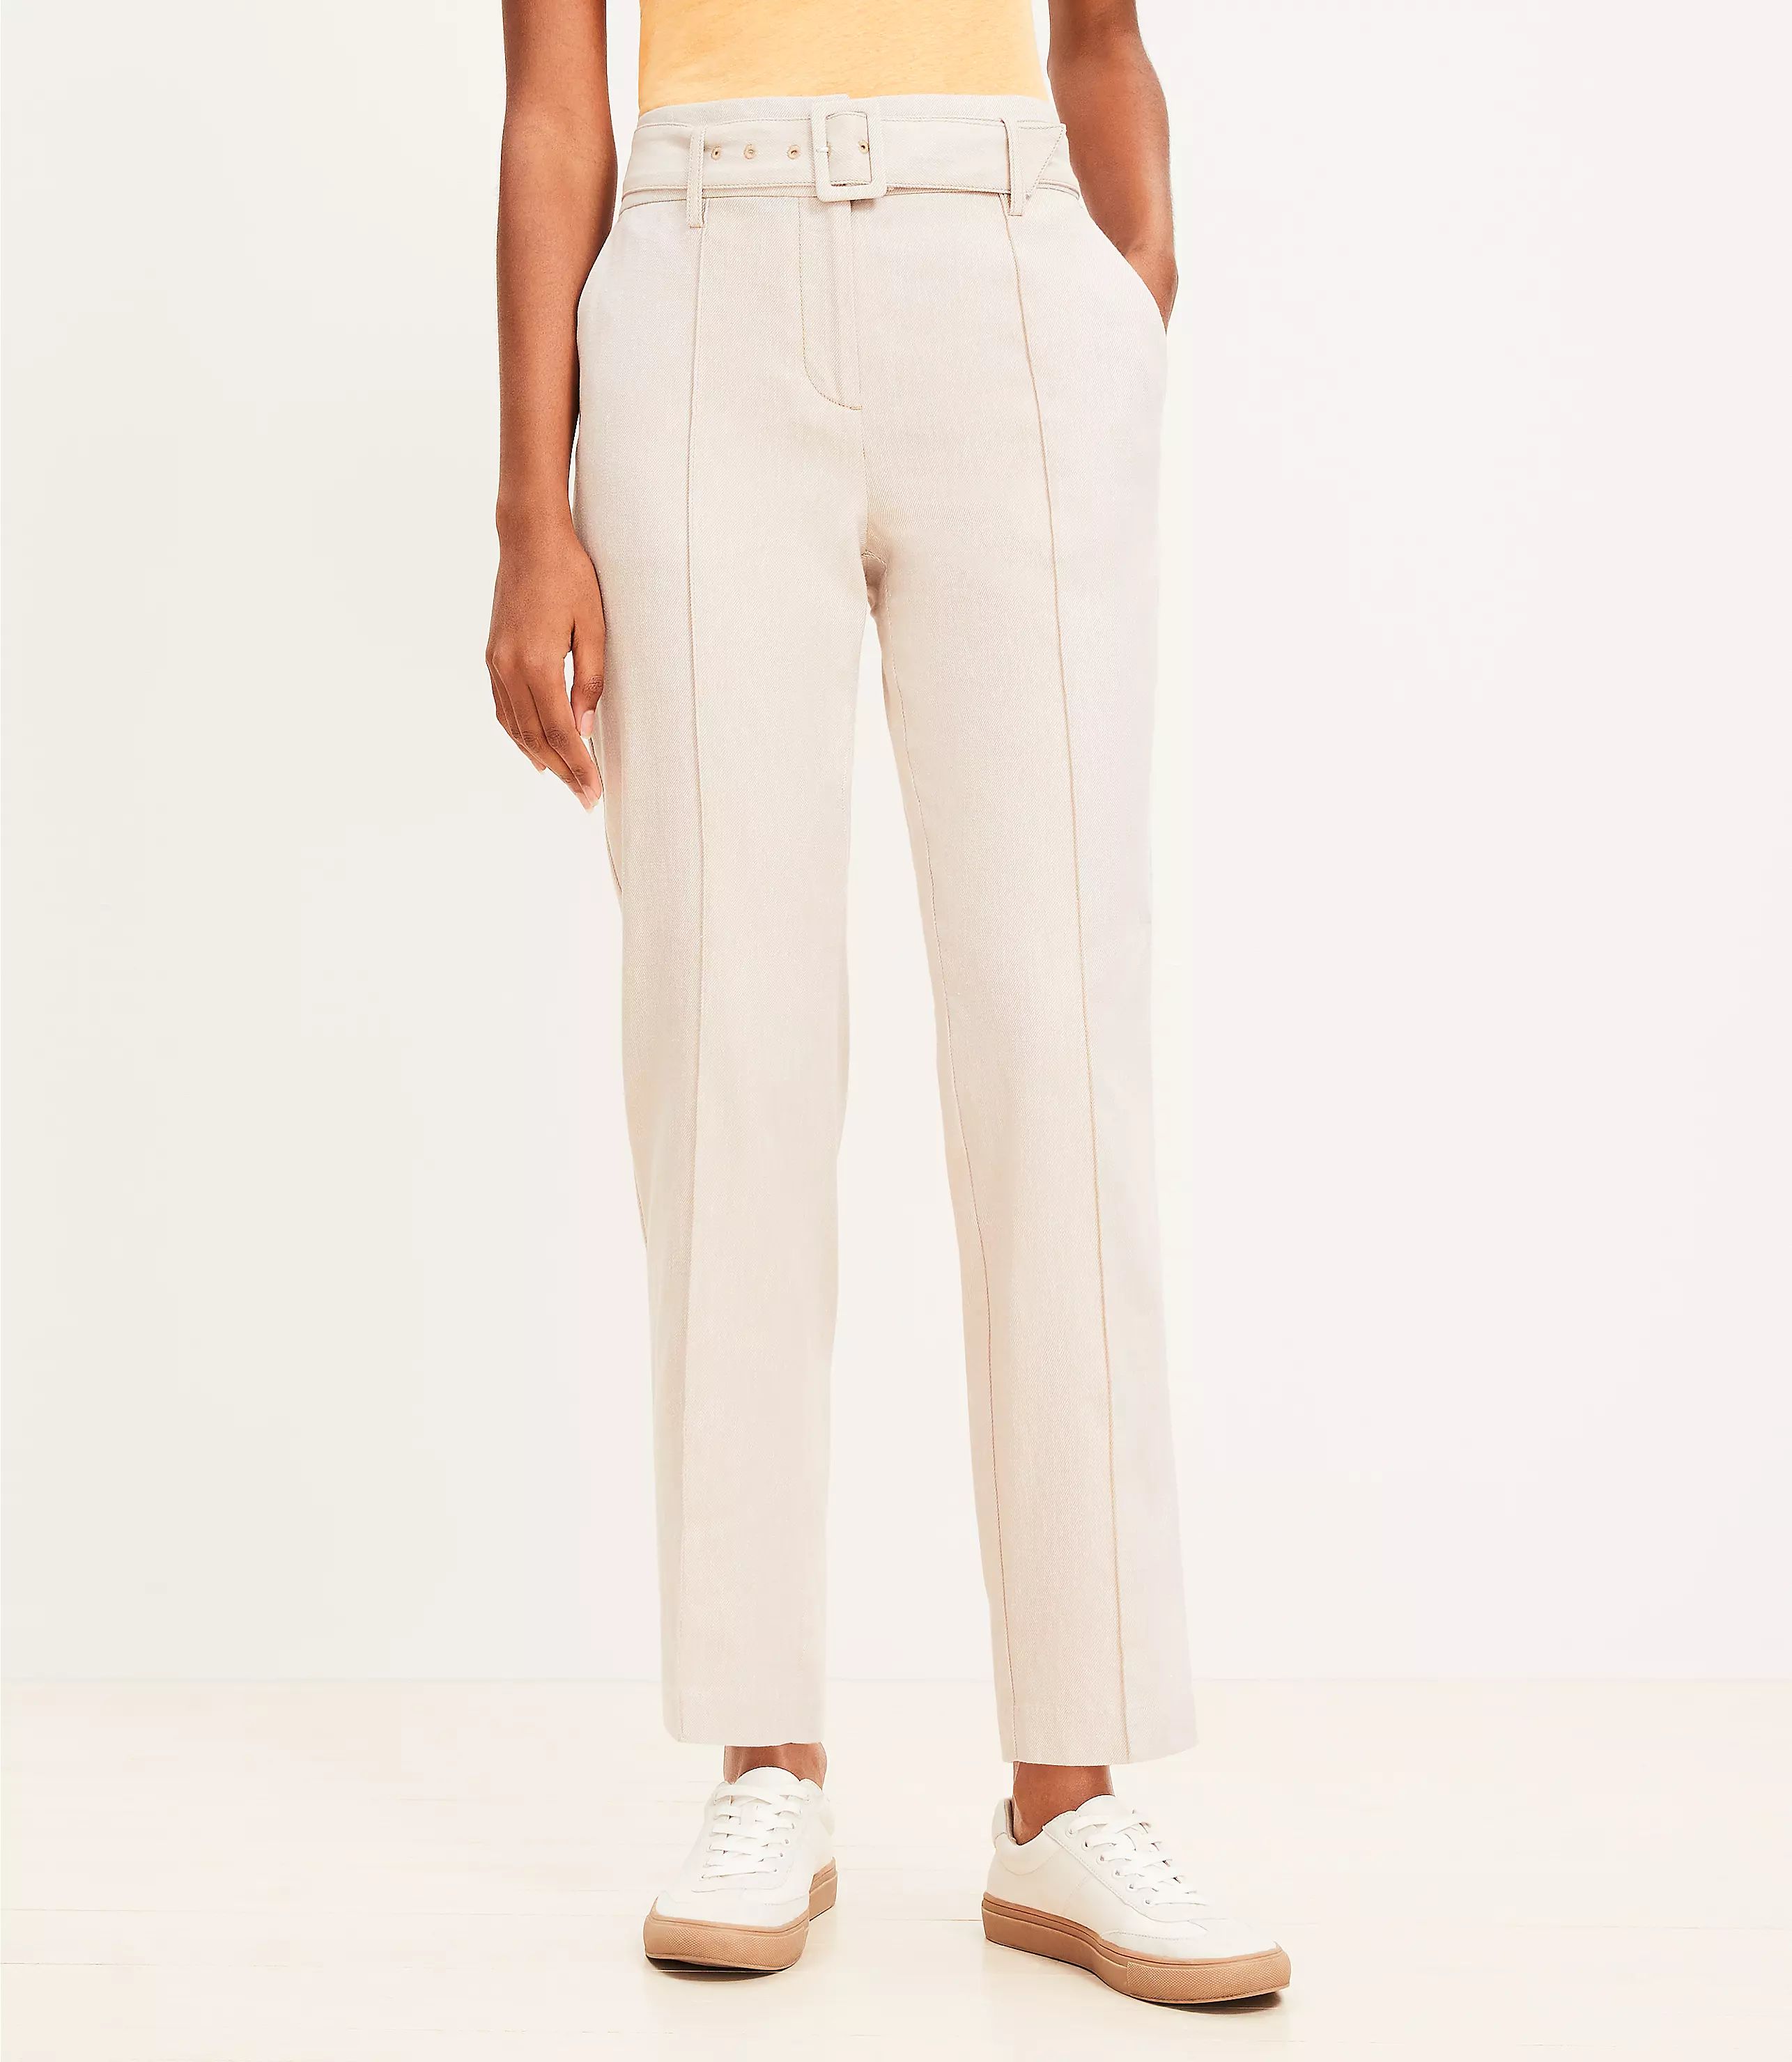 Pintucked Belted Slim Pants in Twill | LOFT